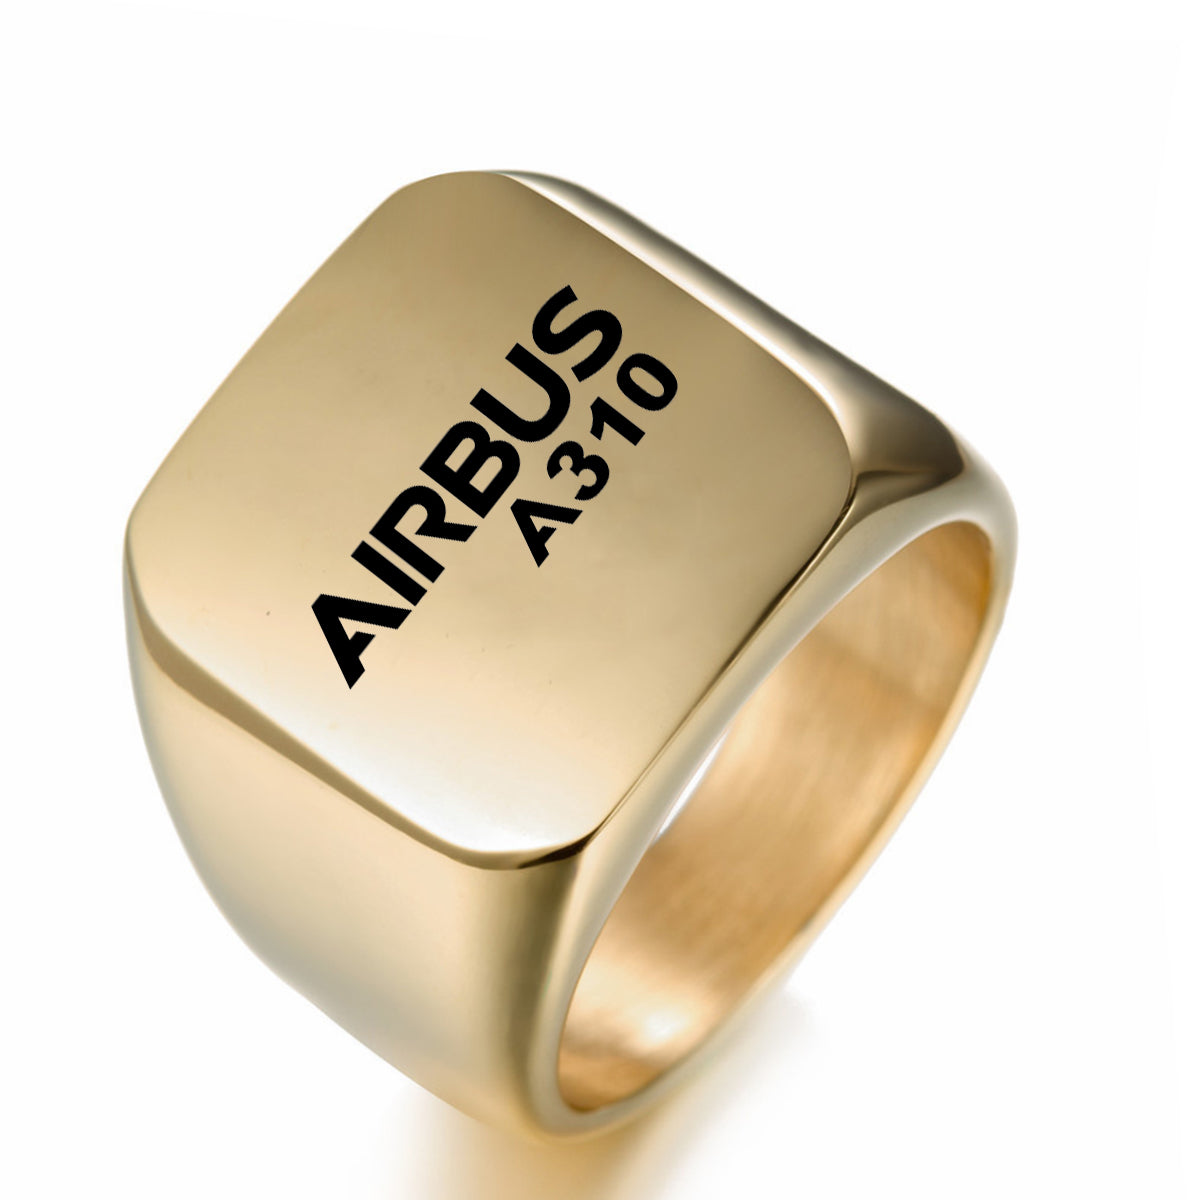 Airbus A310 & Text Designed Men Rings